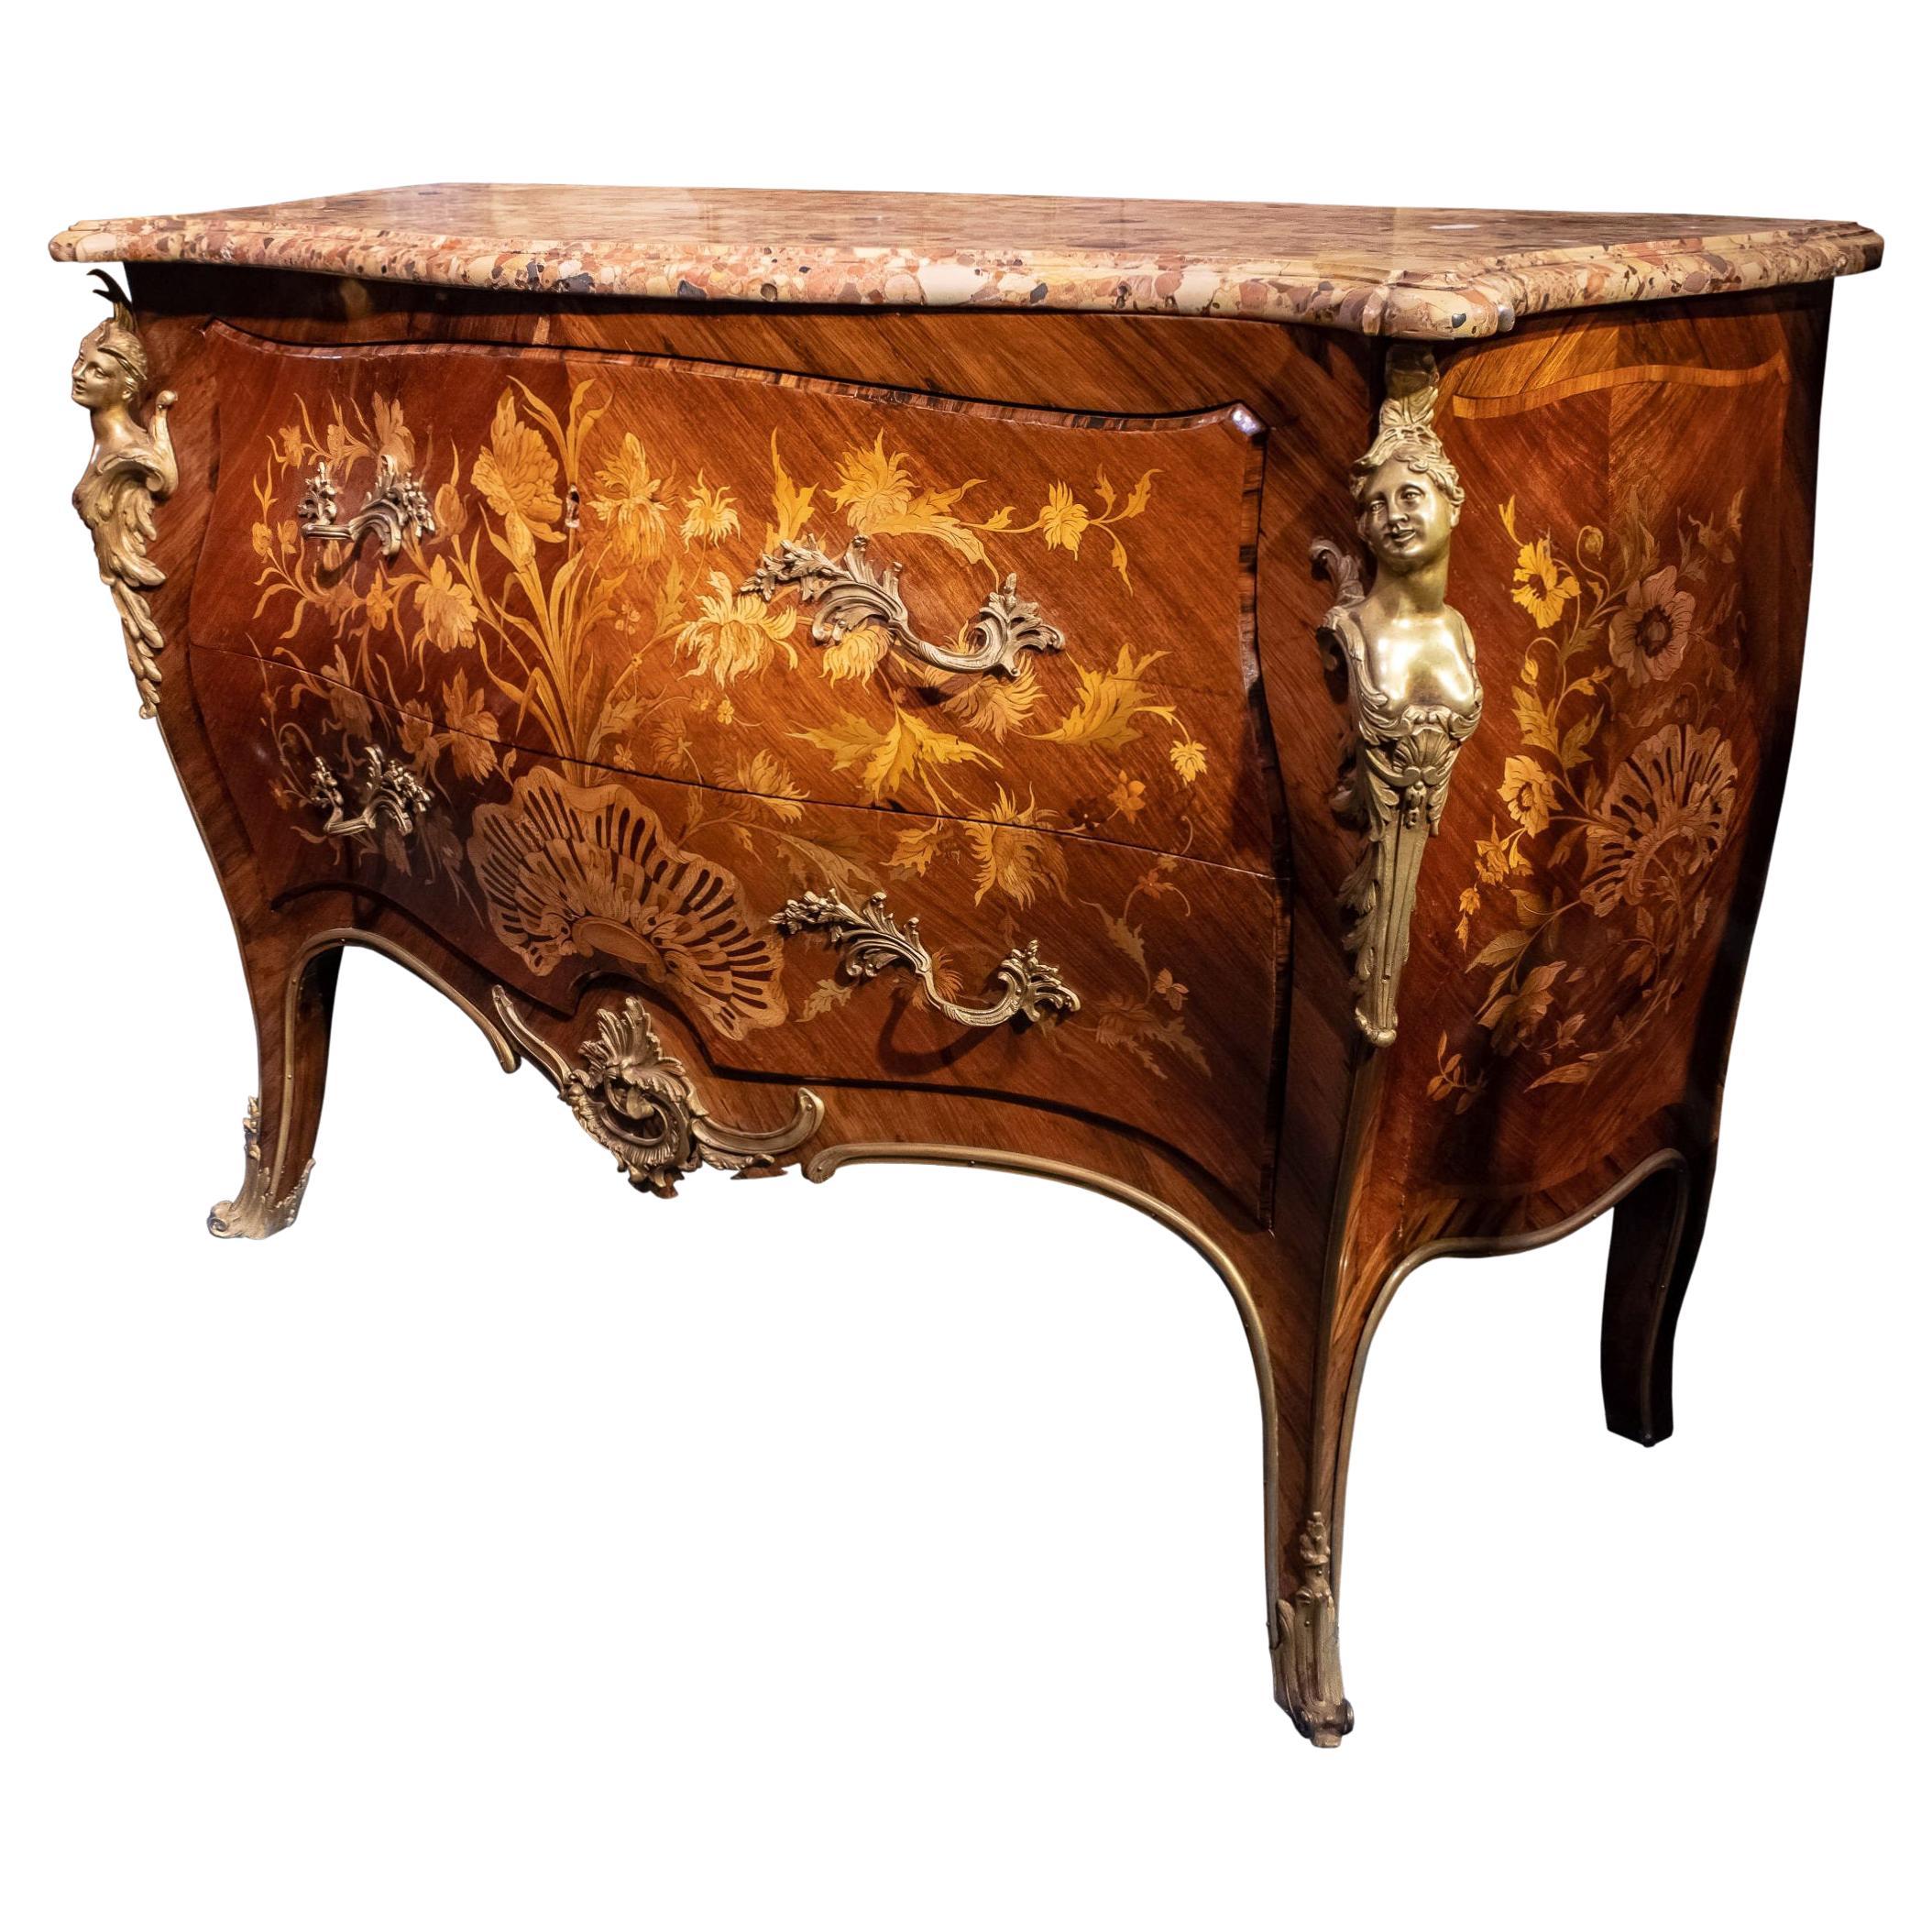 French 19 Century Louis XVI Style Marquetry Inlaid Gilt Bronze-Mounted Commode  For Sale